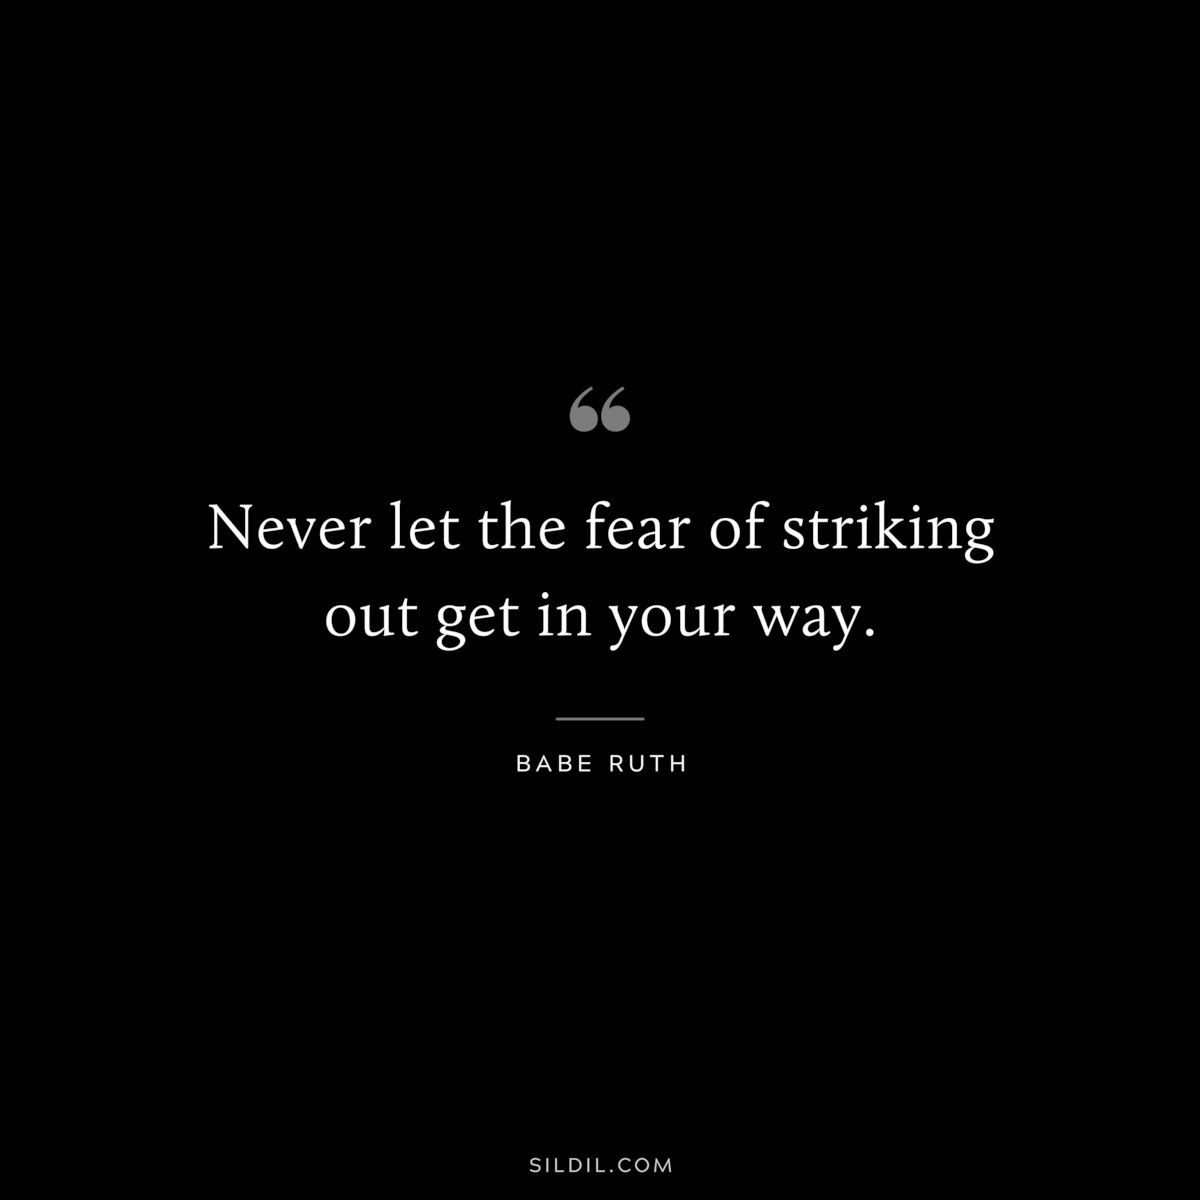 Never let the fear of striking out get in your way. ― Babe Ruth